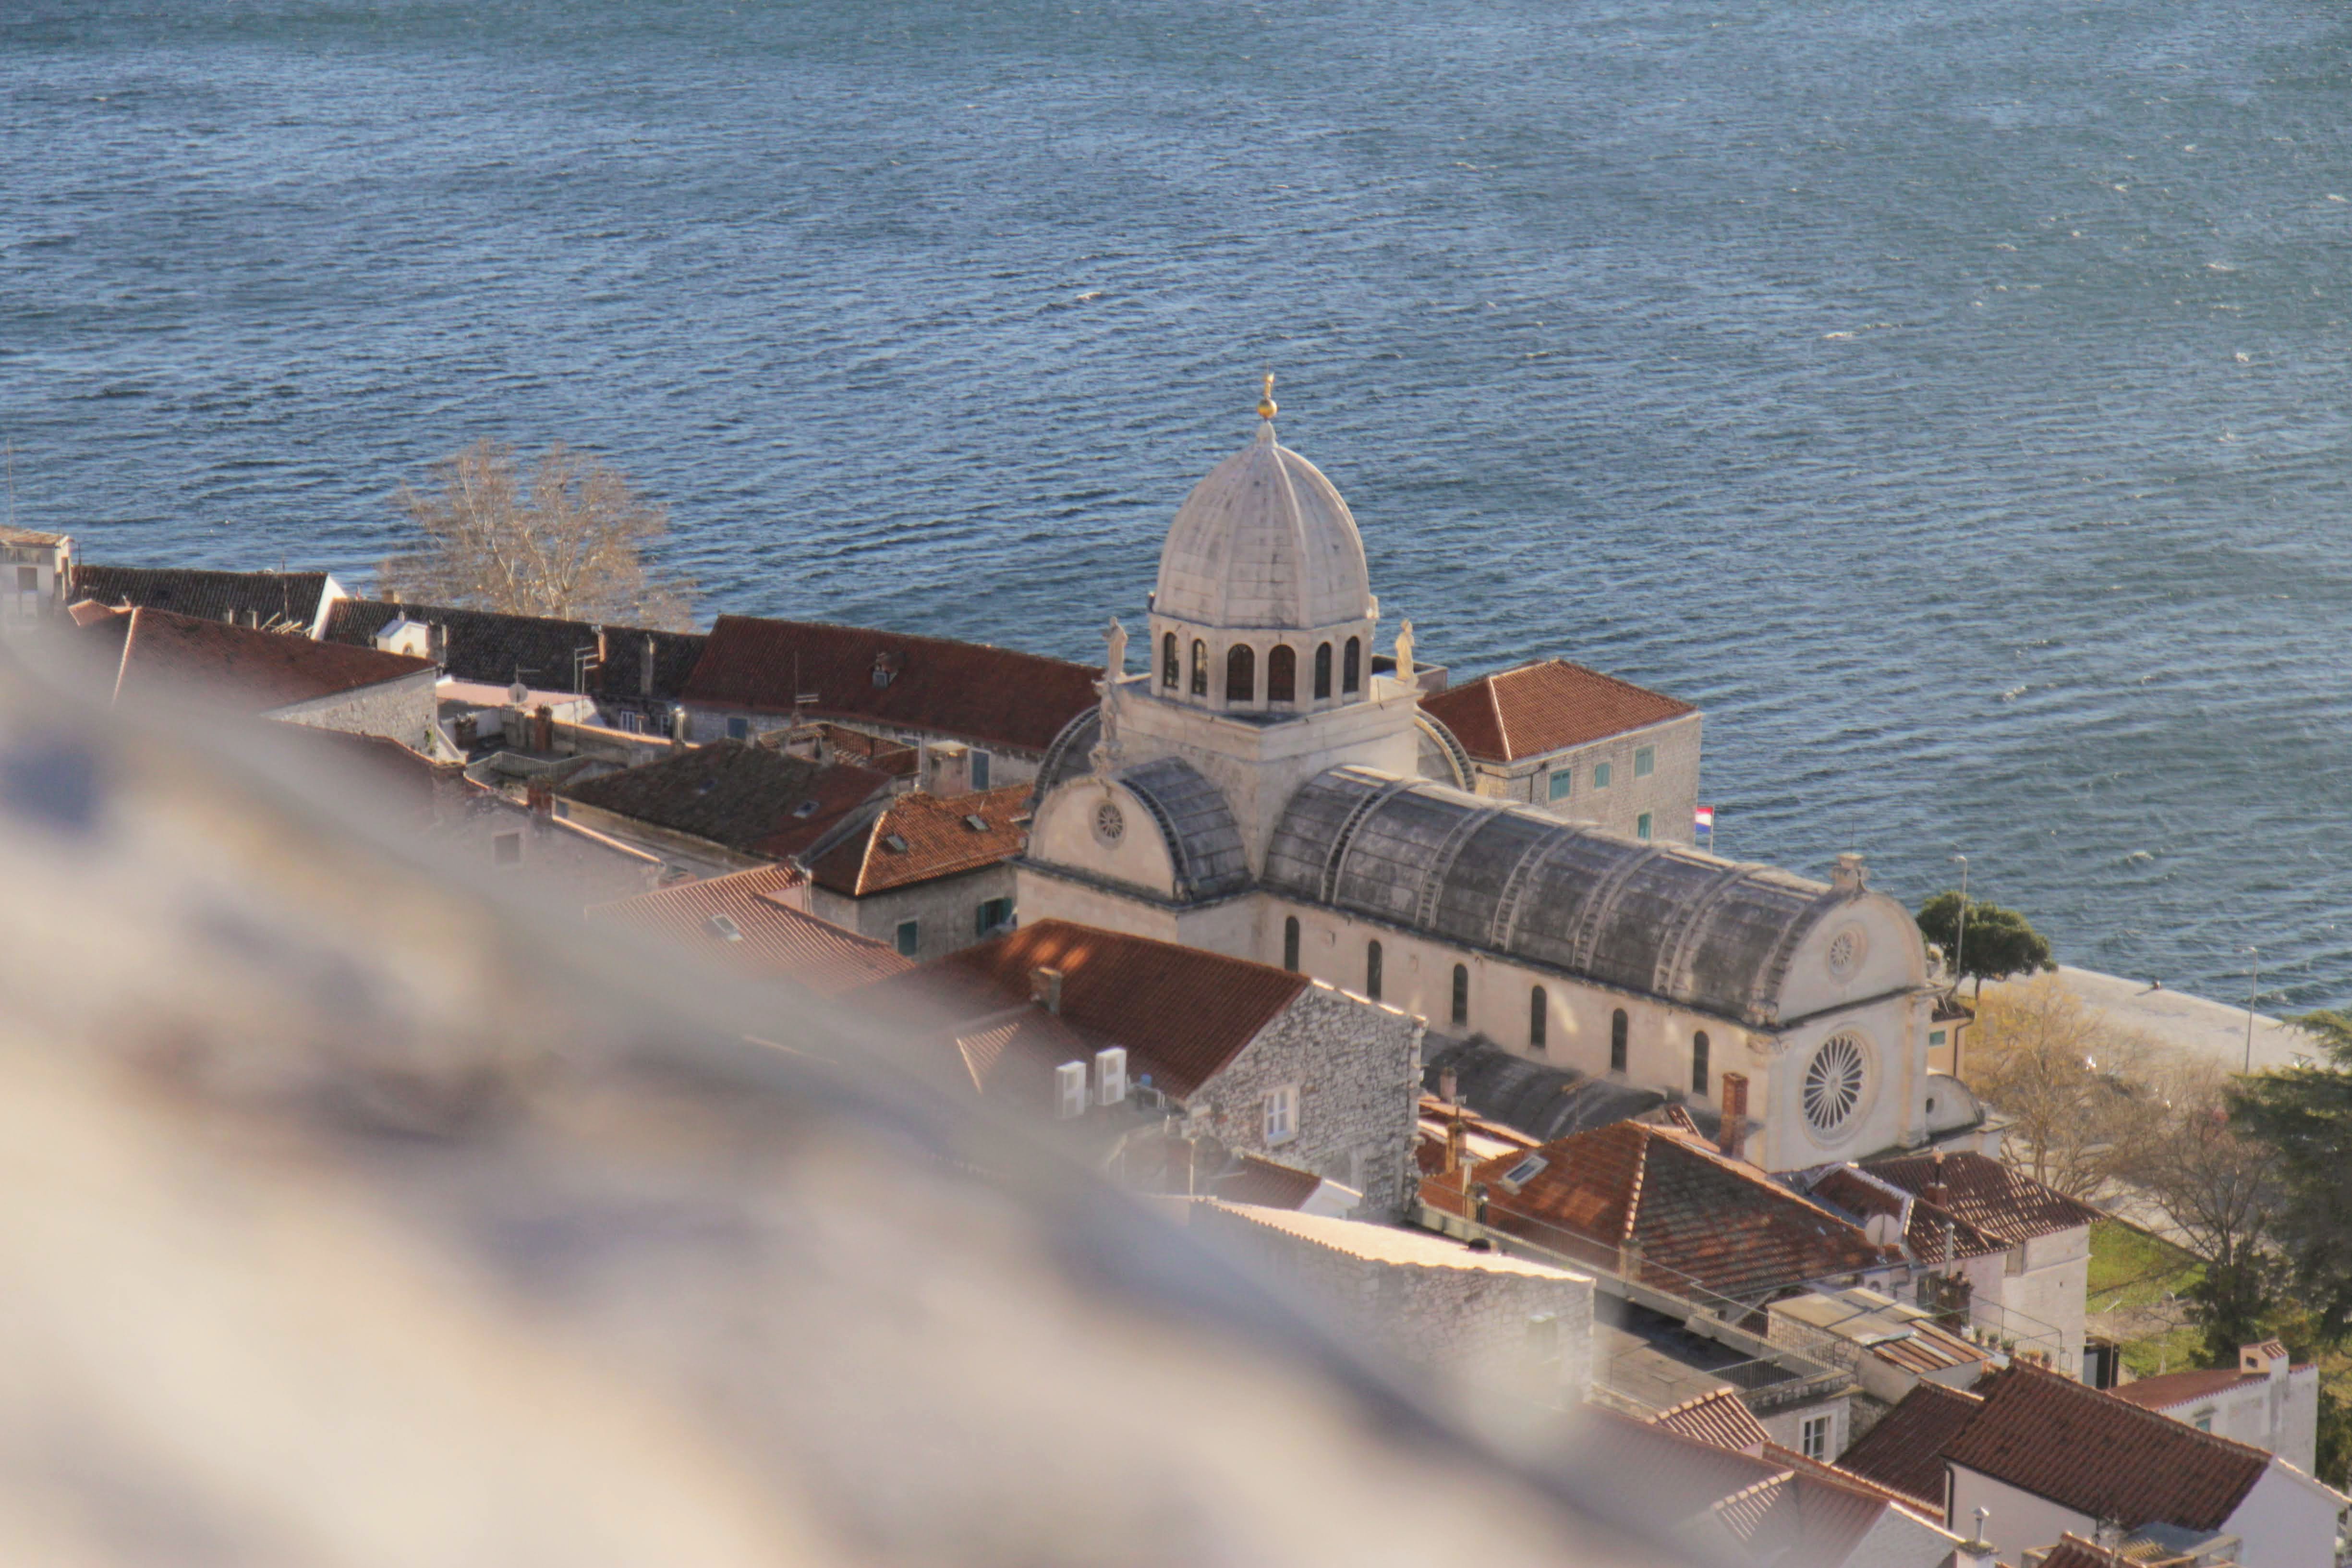 Aerial view of St. James Cathedral in Šibenik, Croatia, with its white dome rising above terracotta roofs. The Adriatic Sea stretches out behind the historic coastal town.